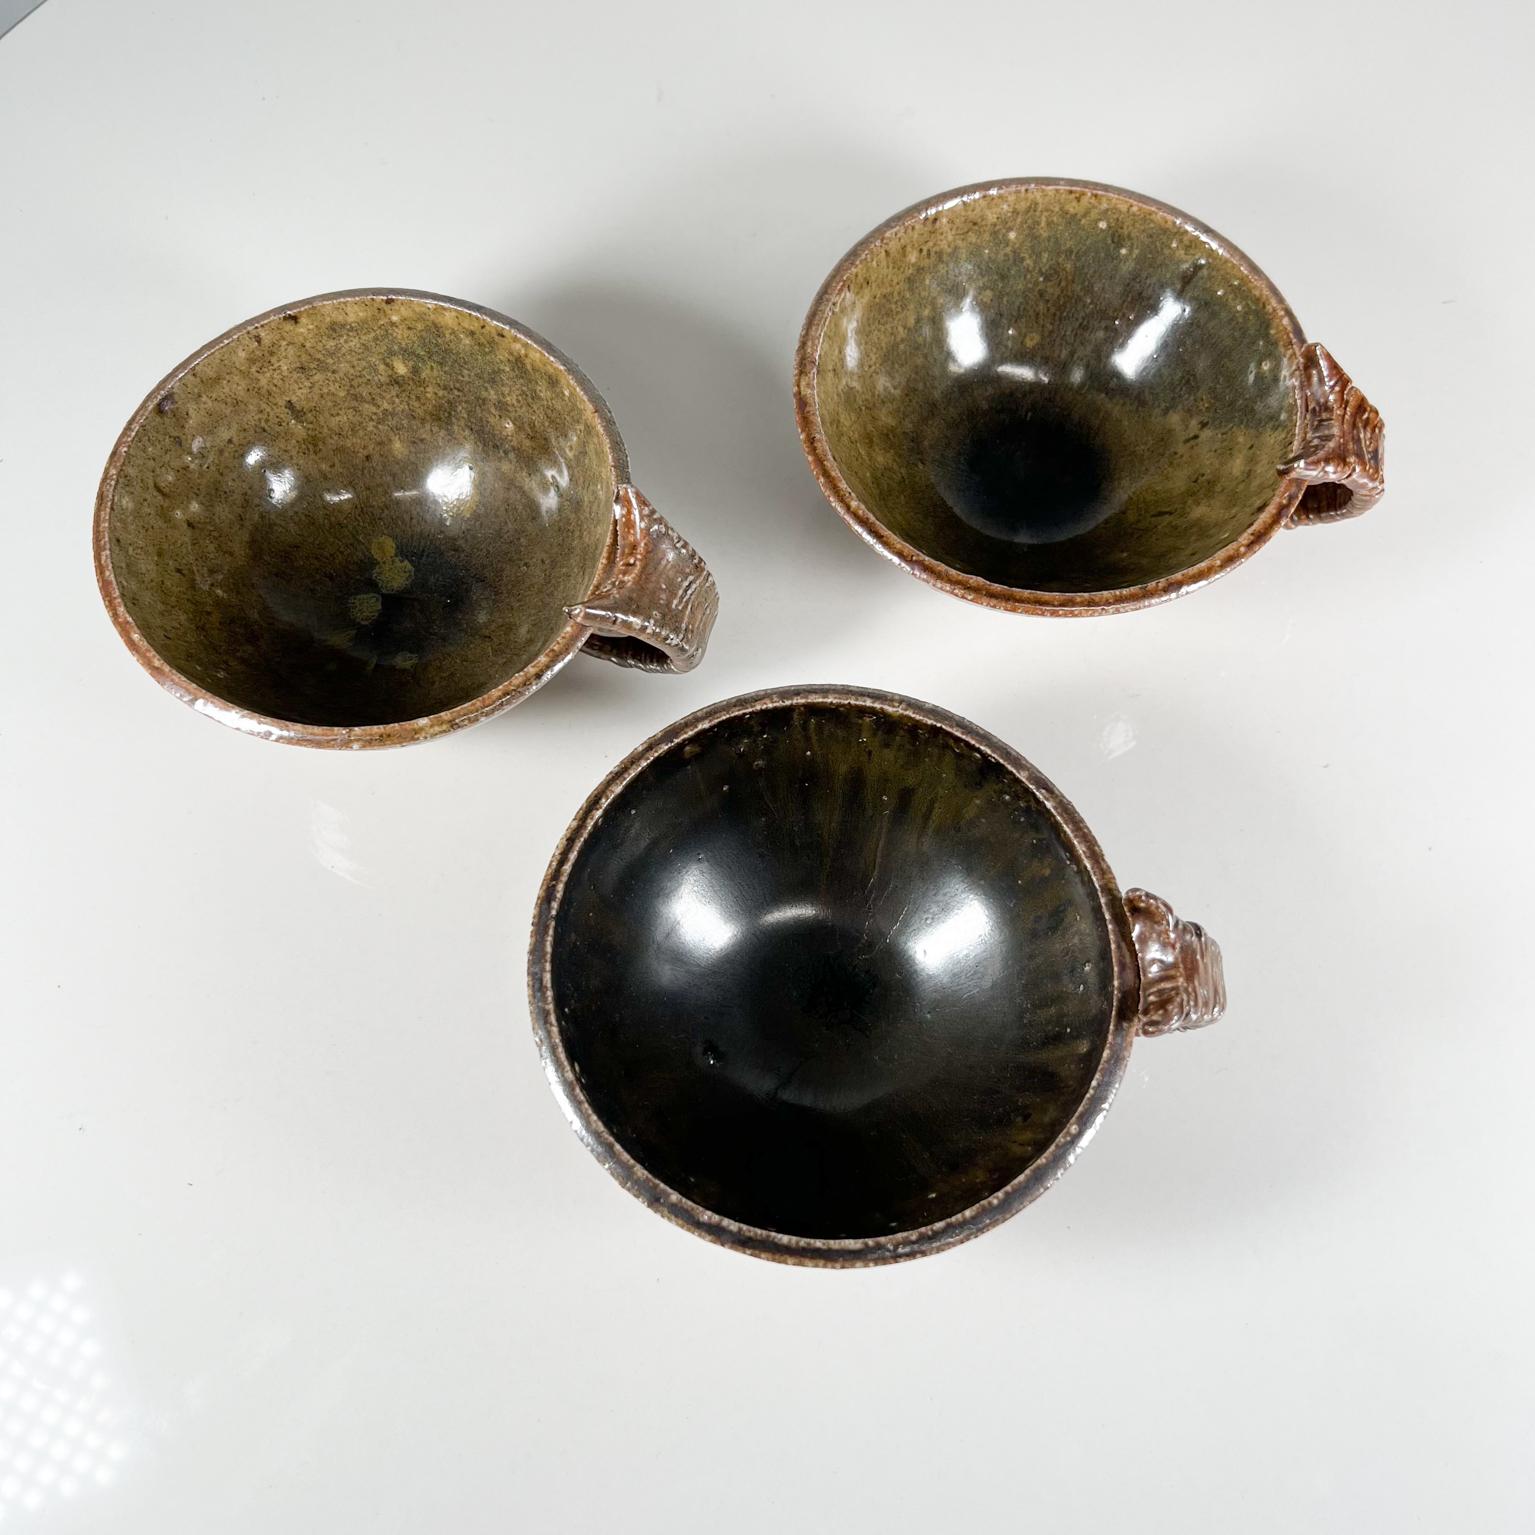 1980 set of three sculptural brown cups art pottery signed Melching
Measures: 2 tall x 4.5 width x 5.38 depth
Preowned vintage unrestored
Review images please.
  